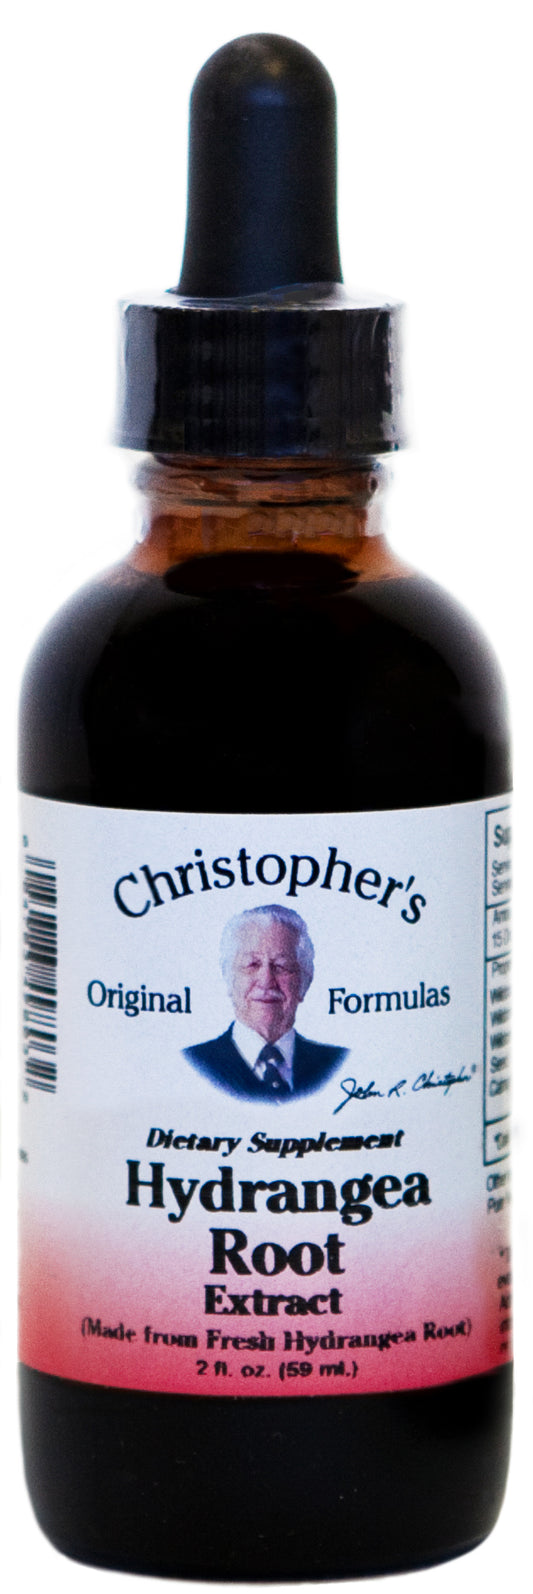 Dr. Christopher's Hydrangea Root Glycerine Extract